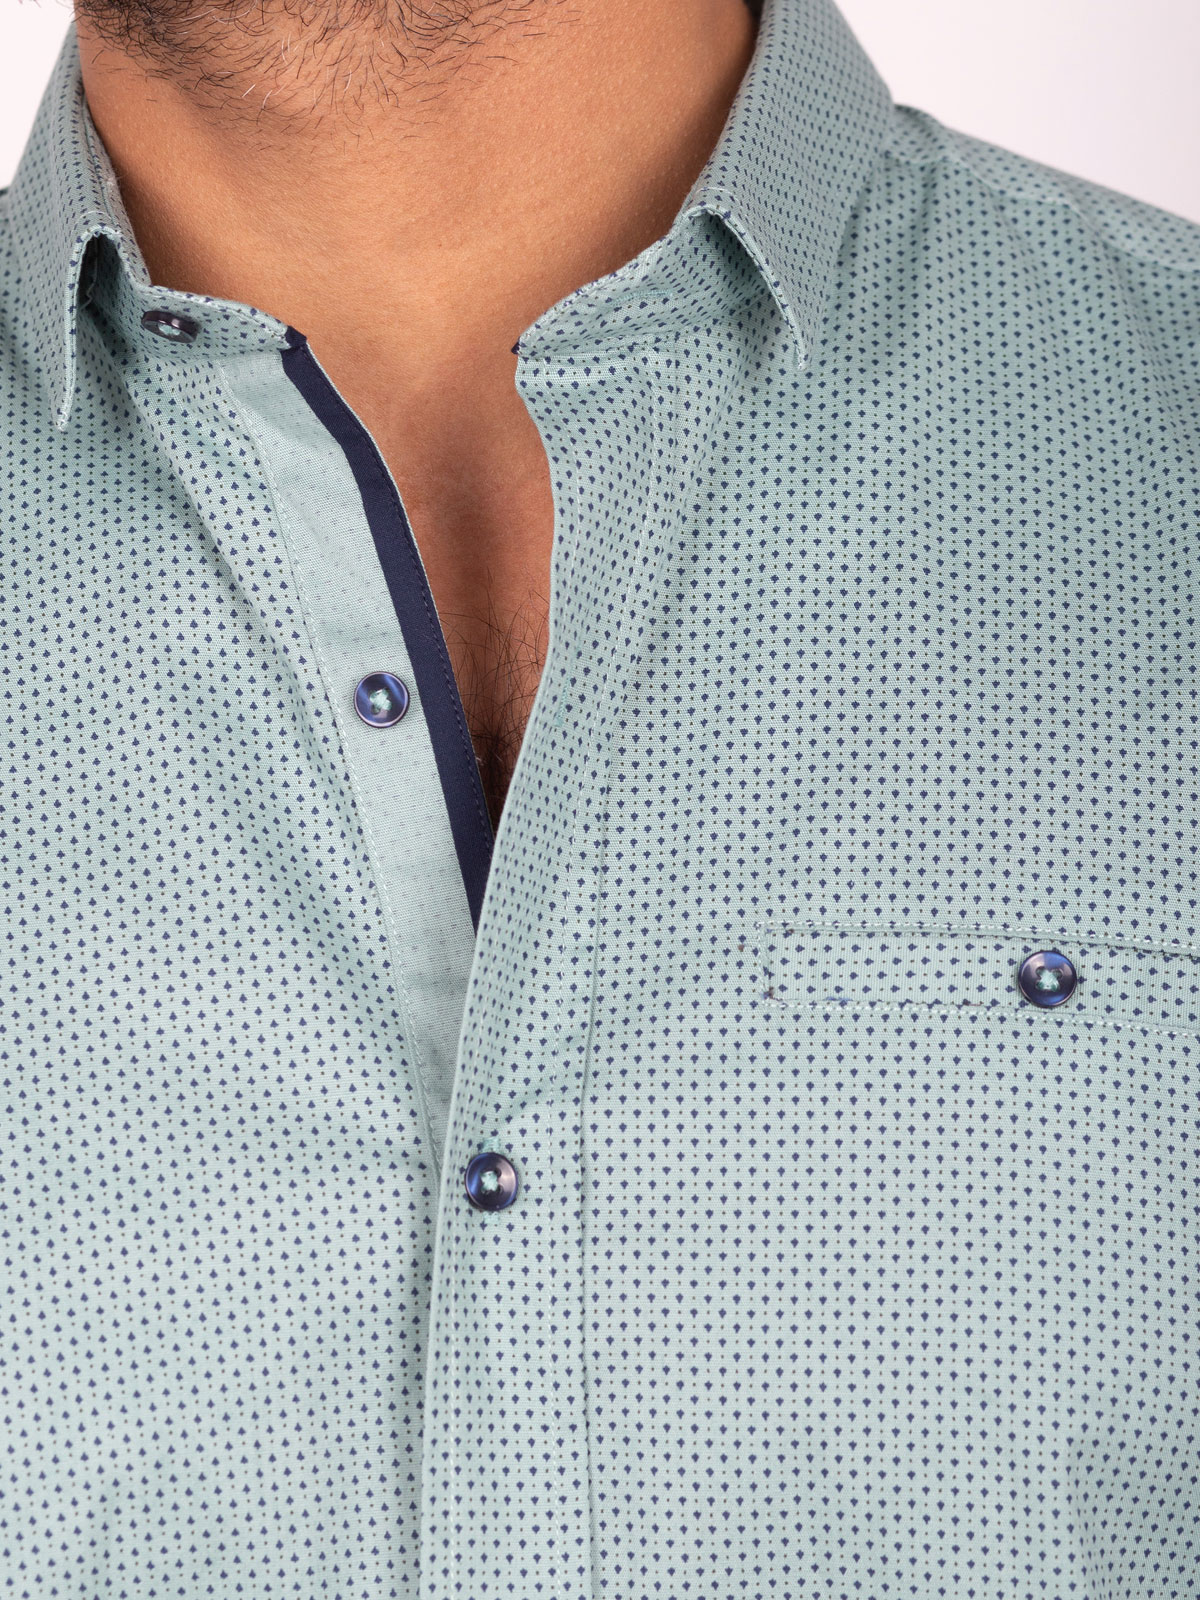 Shirt in mint color with blue patterns - 21509 € 43.87 img3